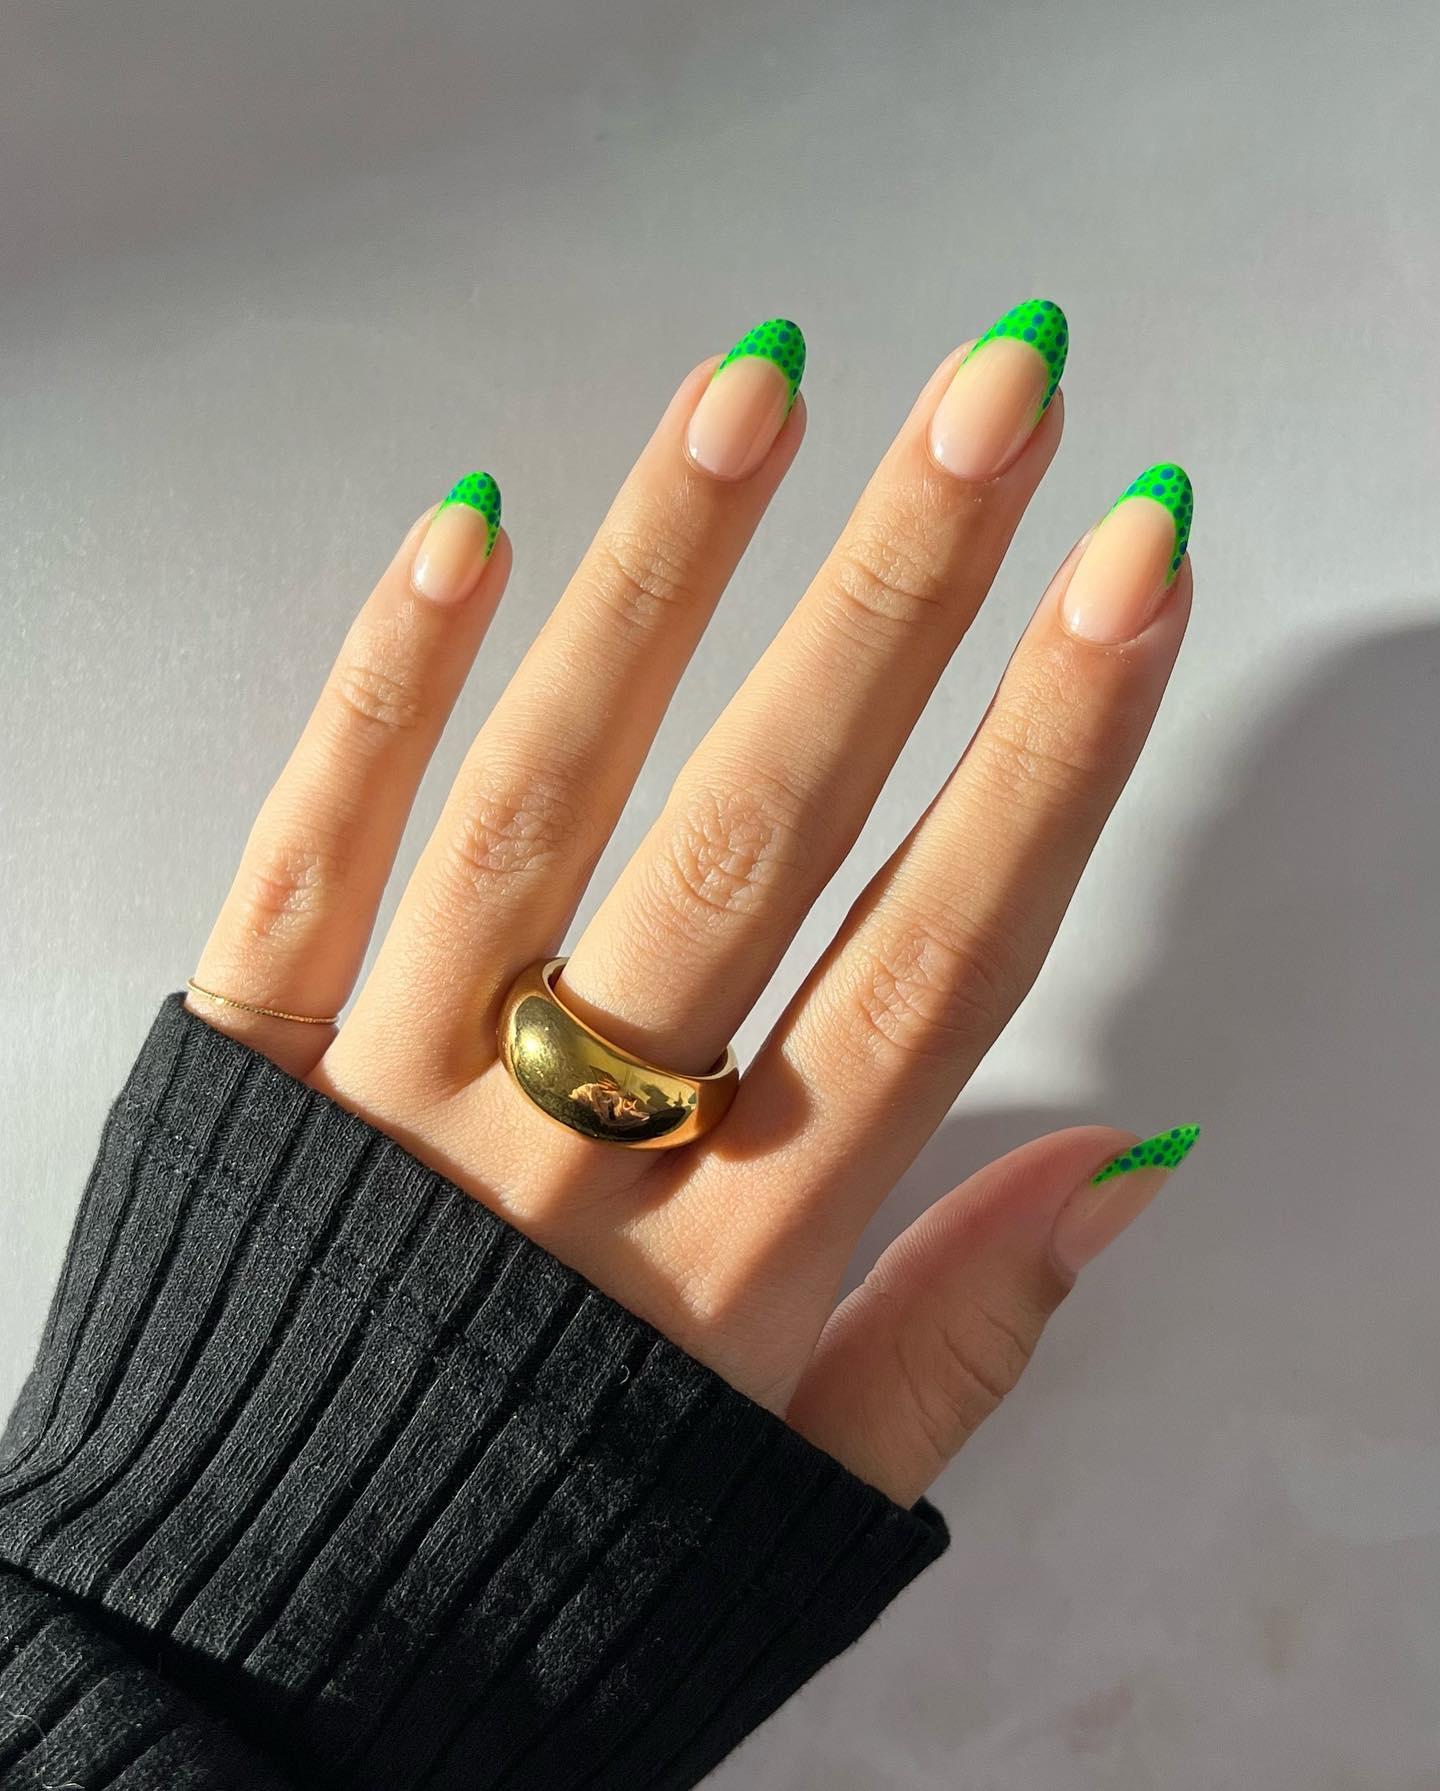 Neon Bright Summer Nails: 33+ Fun Playful Ideas with Lots of Color - Nail Designs Daily